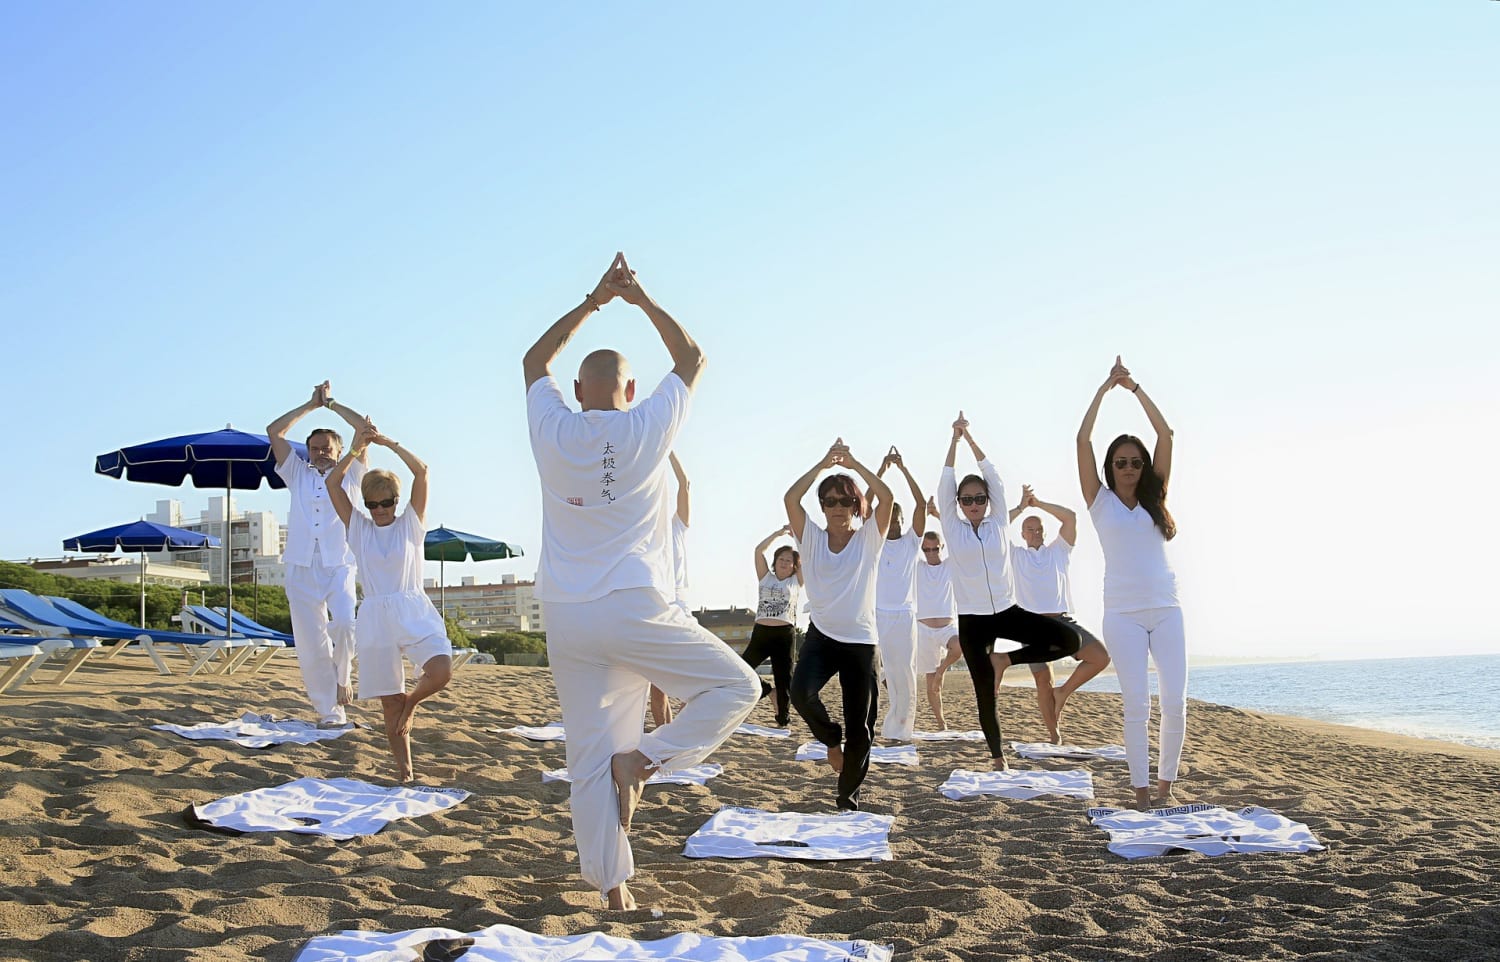 Read The 7 Top Benefits of Yoga That will Make You feel Better Today